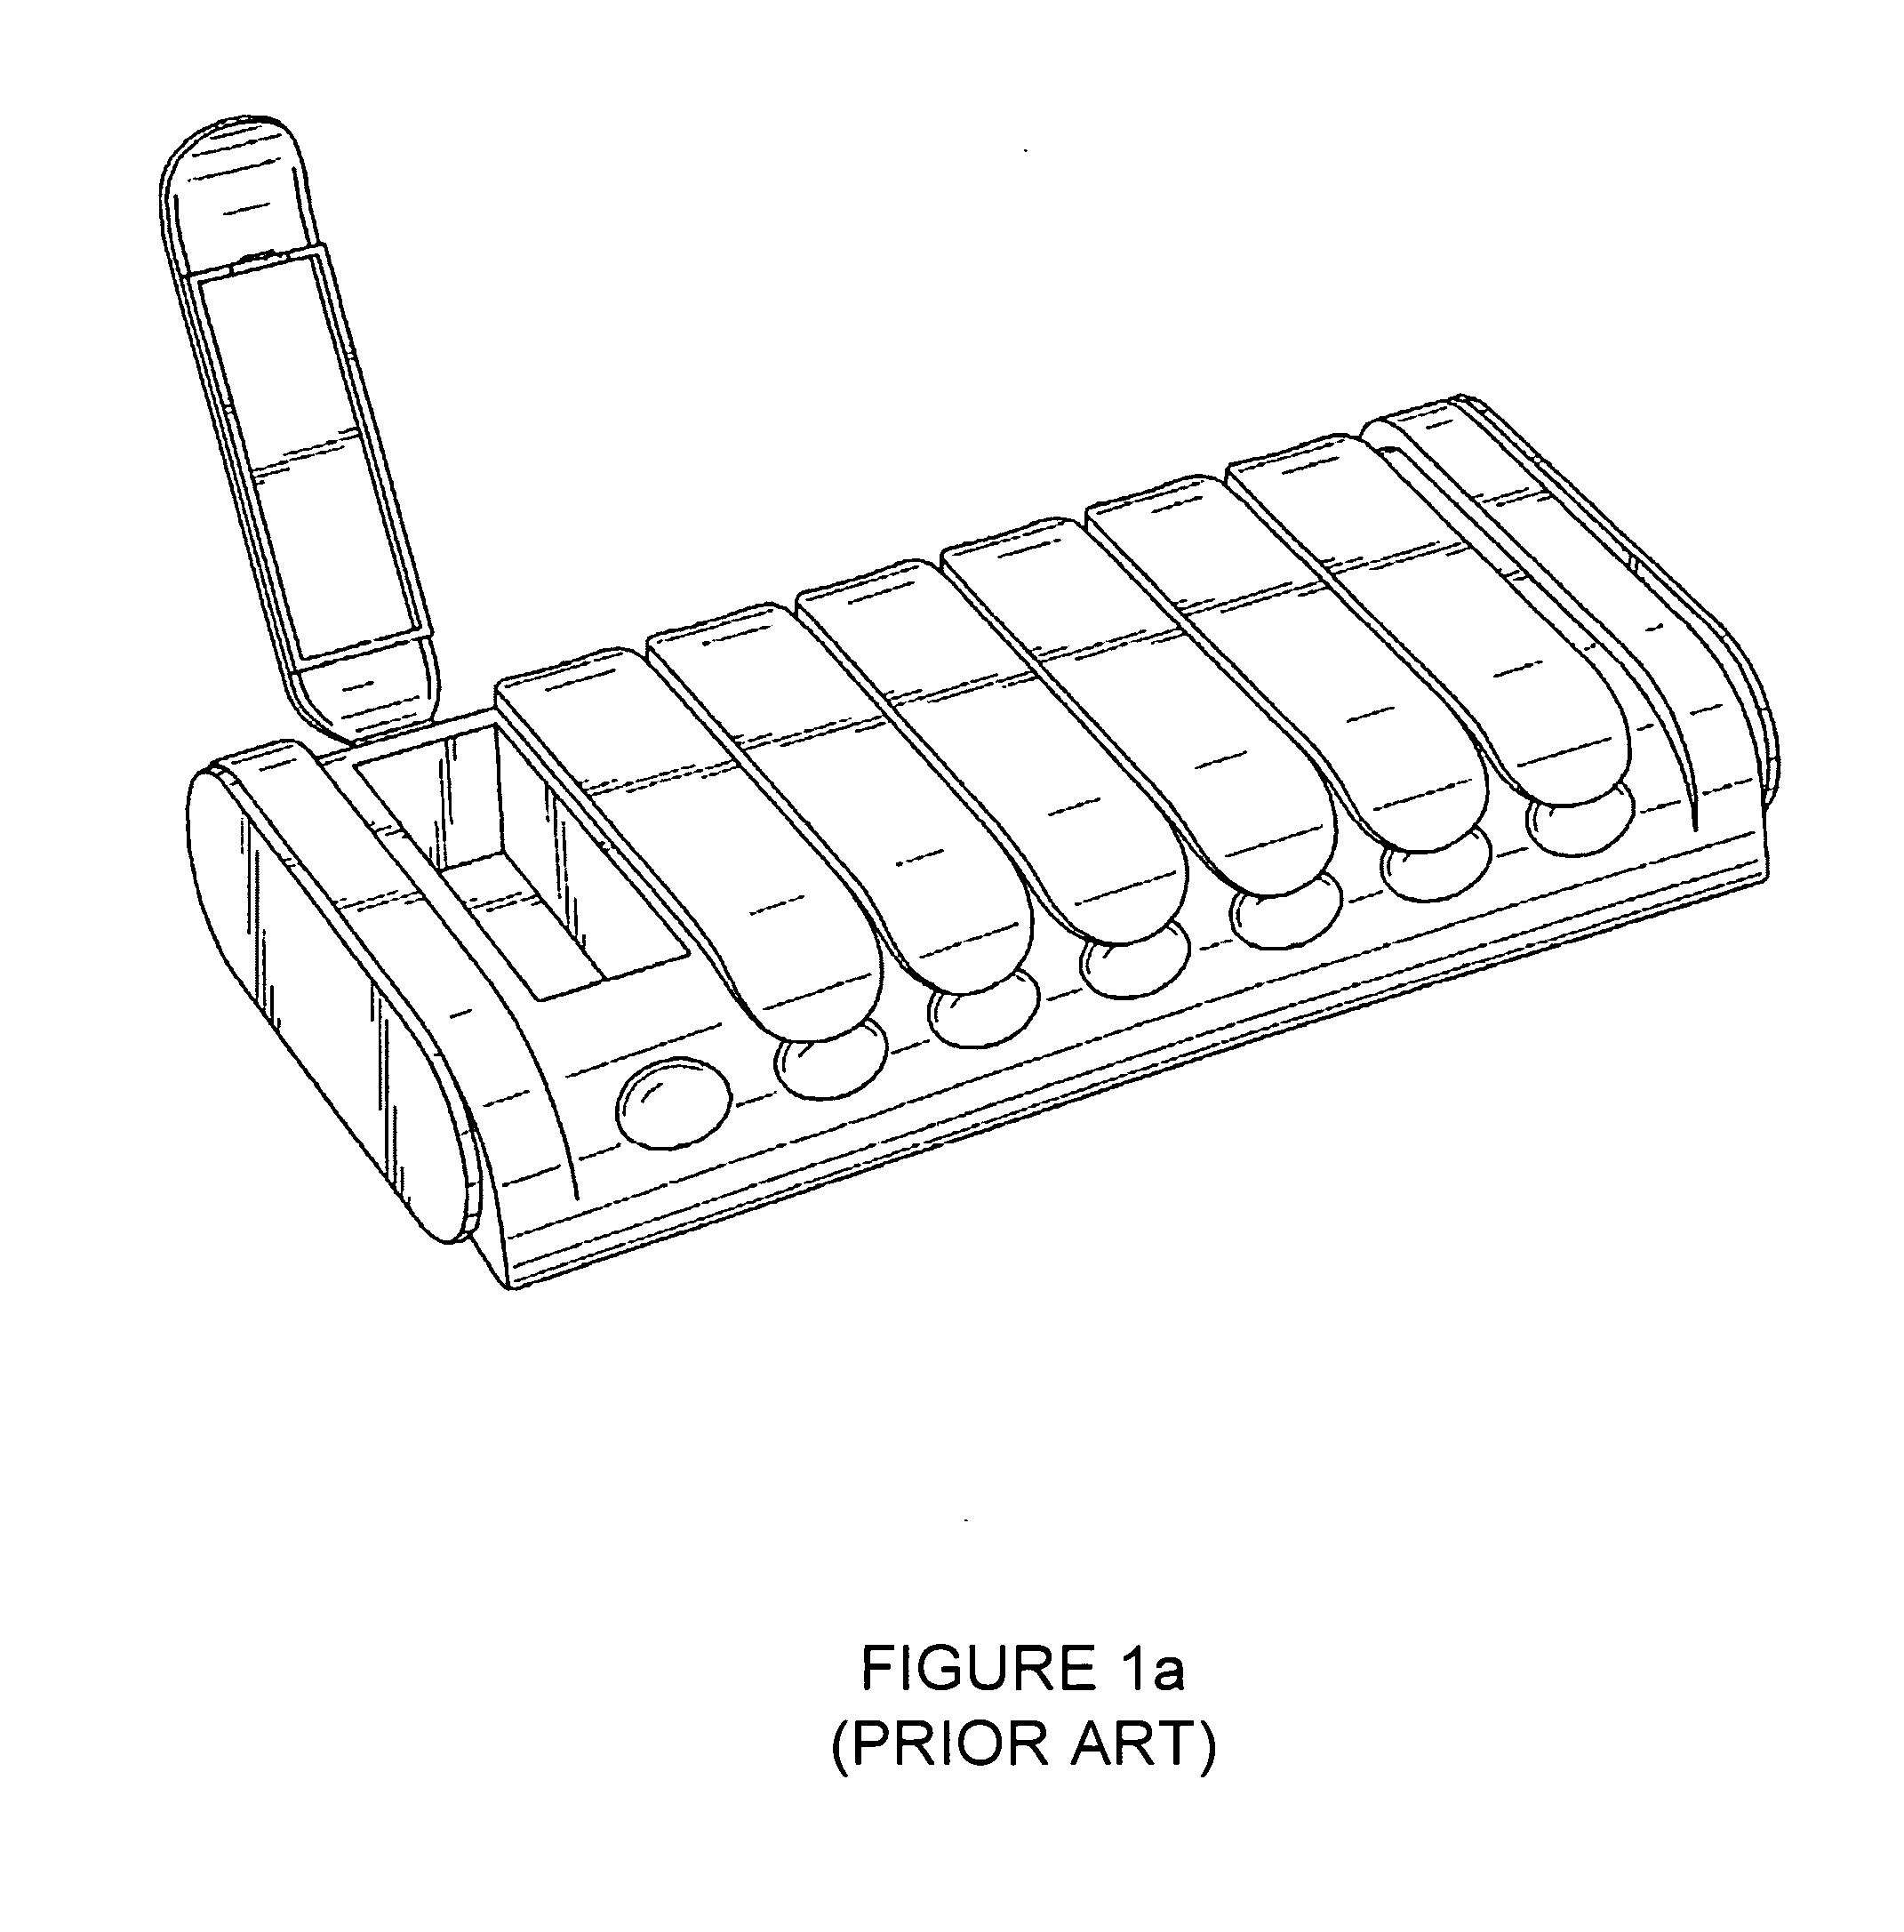 Automated medication management system and method for use